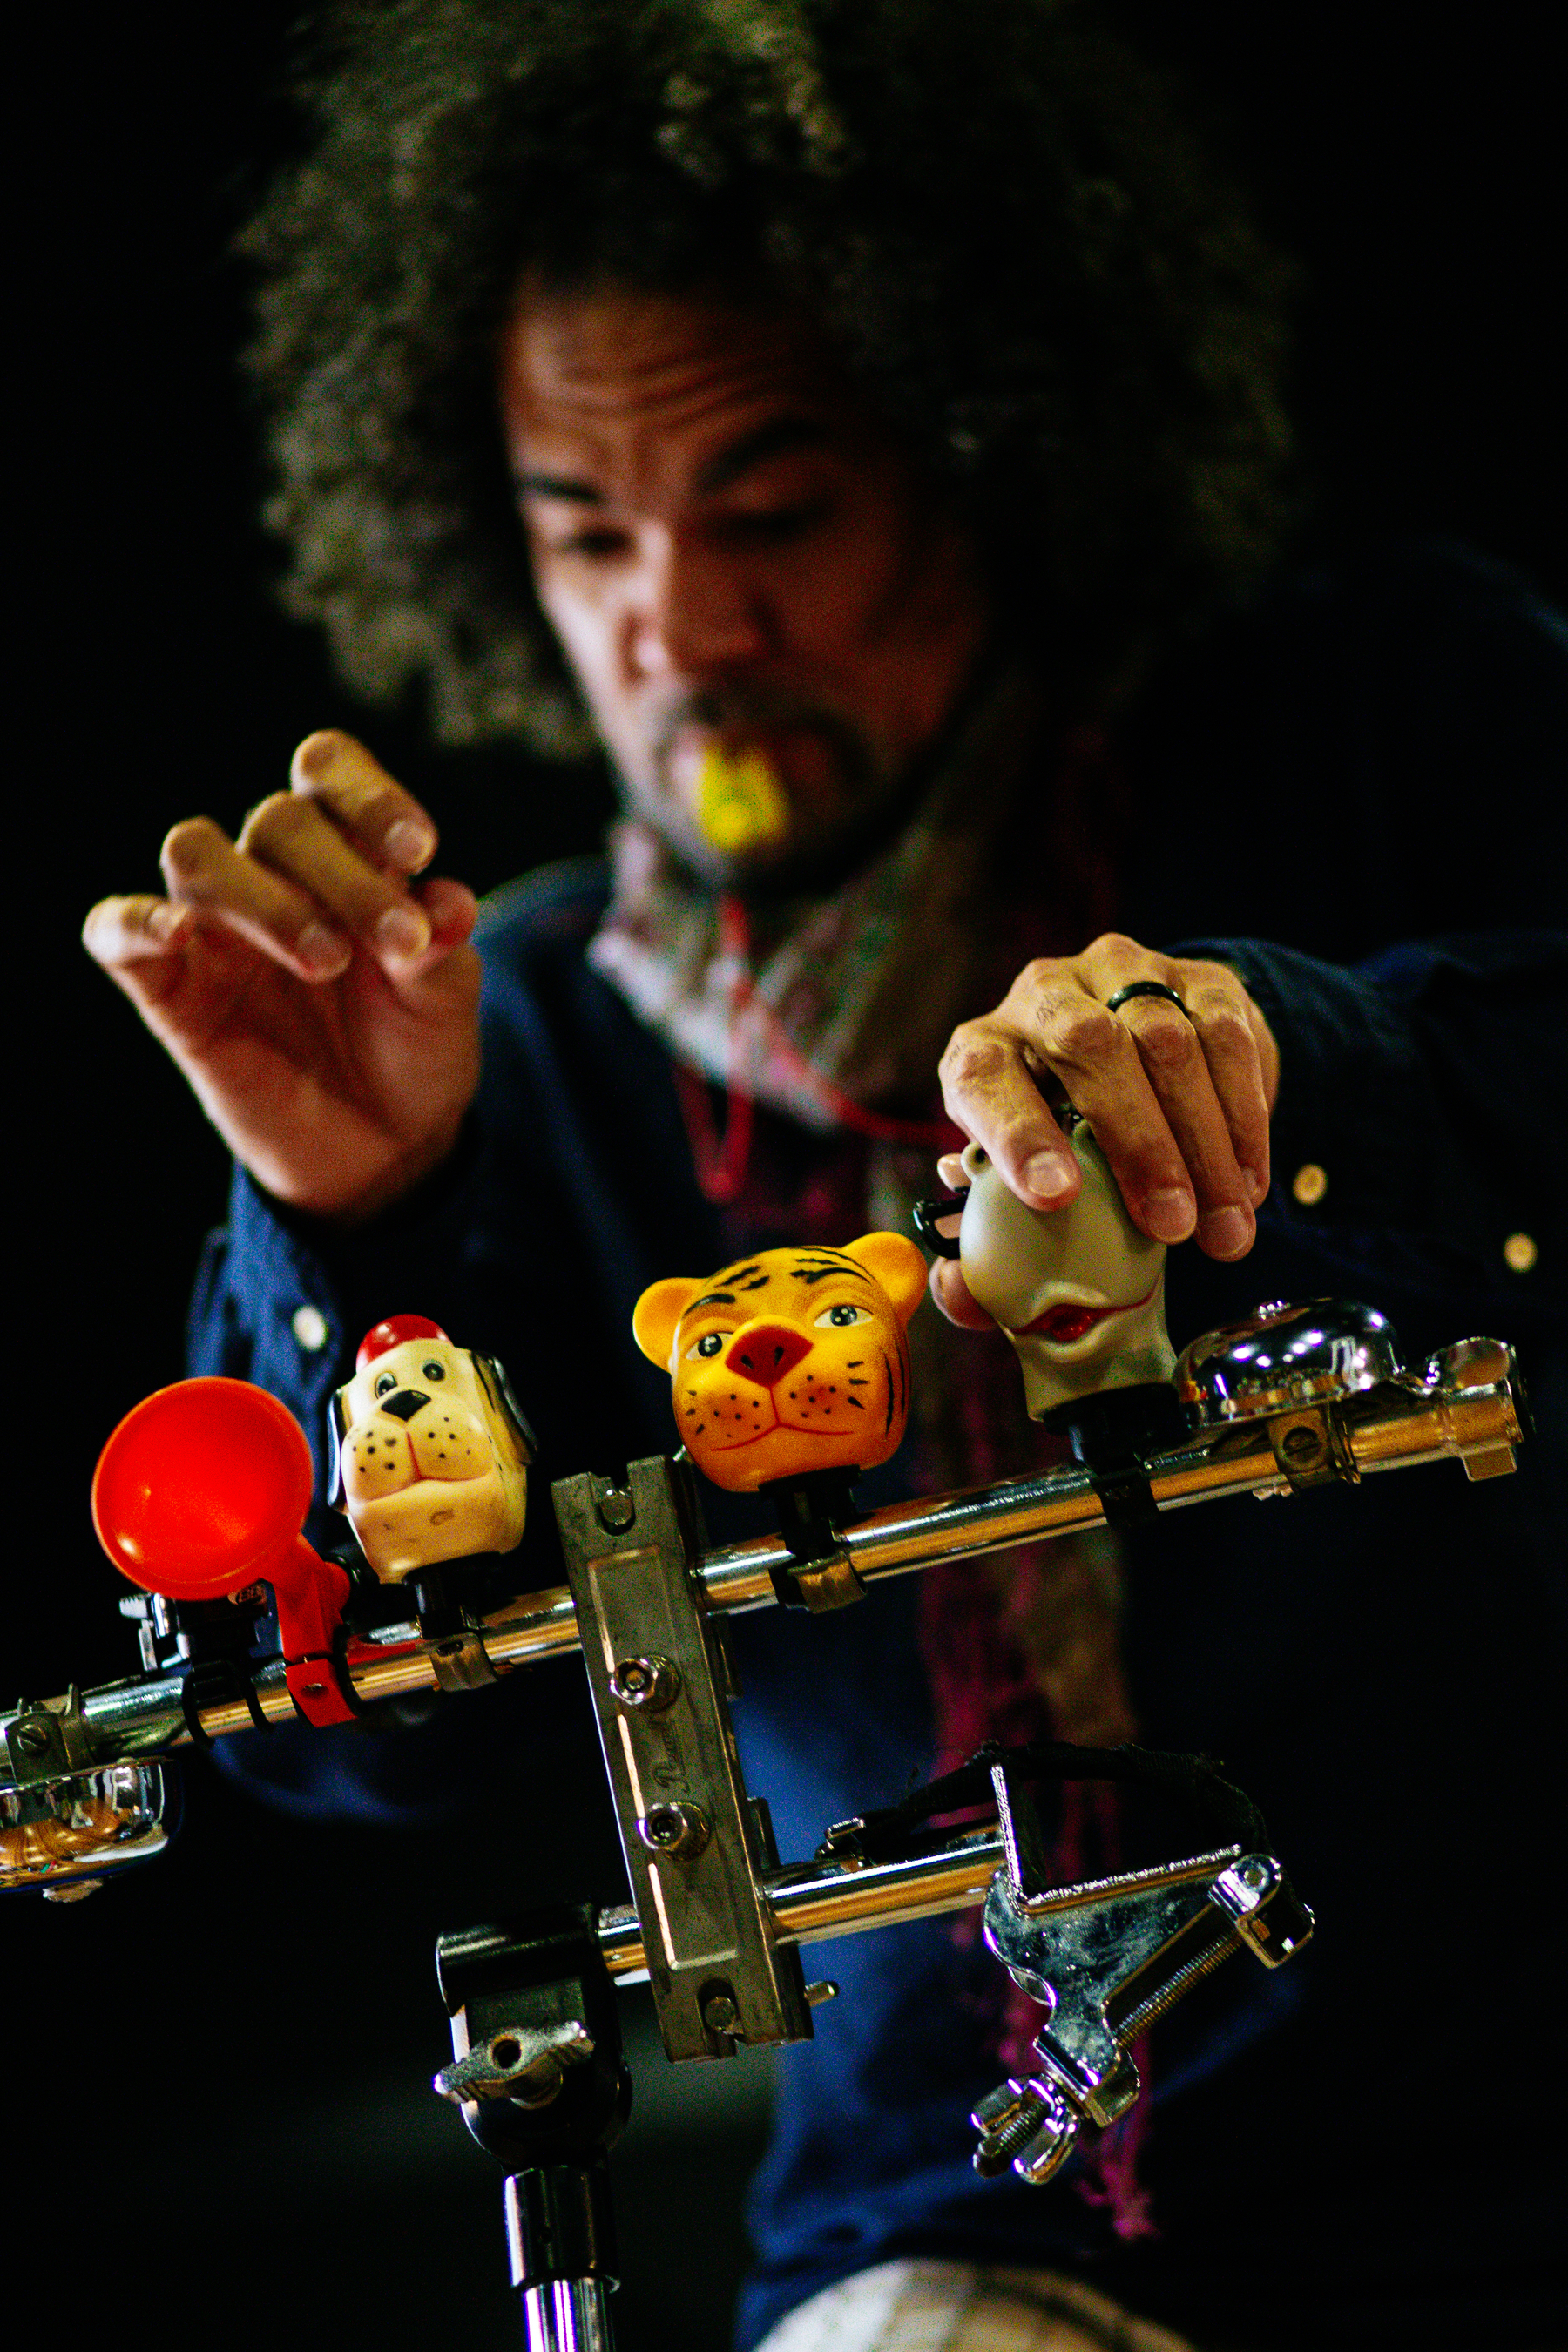 A musician plays child-themed tiny instruments.